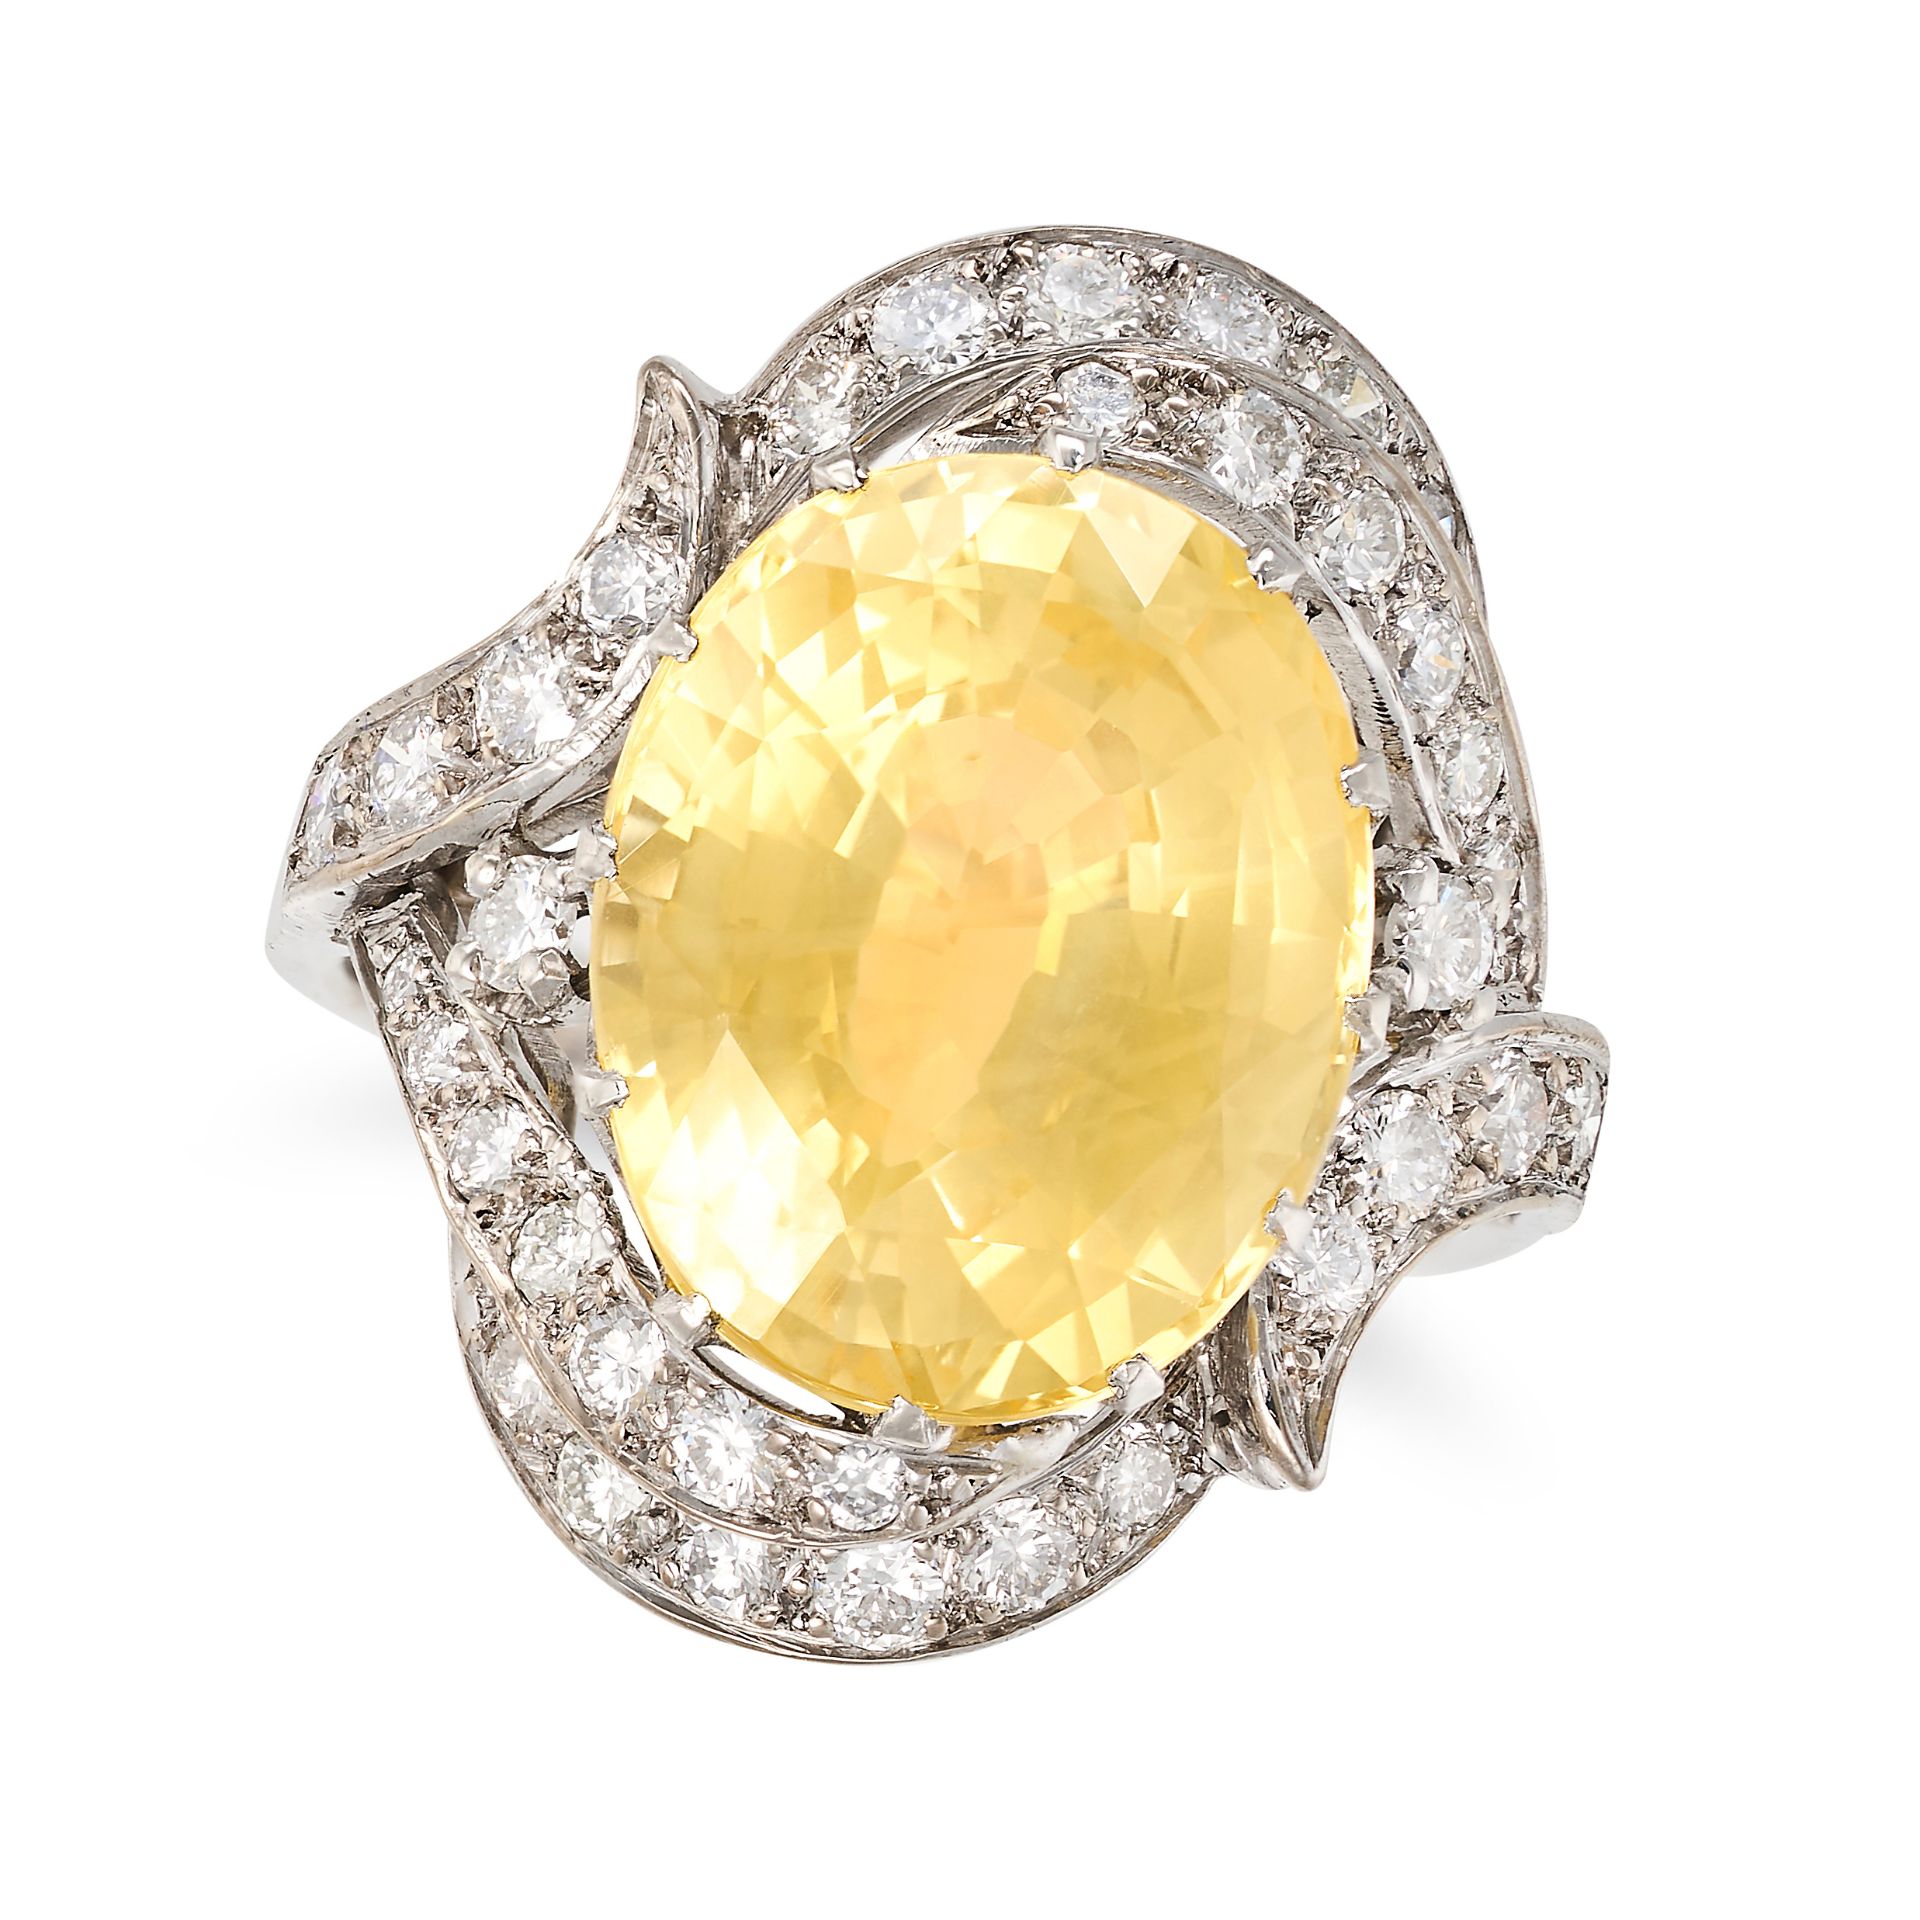 A CEYLON NO HEAT YELLOW SAPPHIRE AND DIAMOND RING in 18ct white gold and platinum, set with an ov...